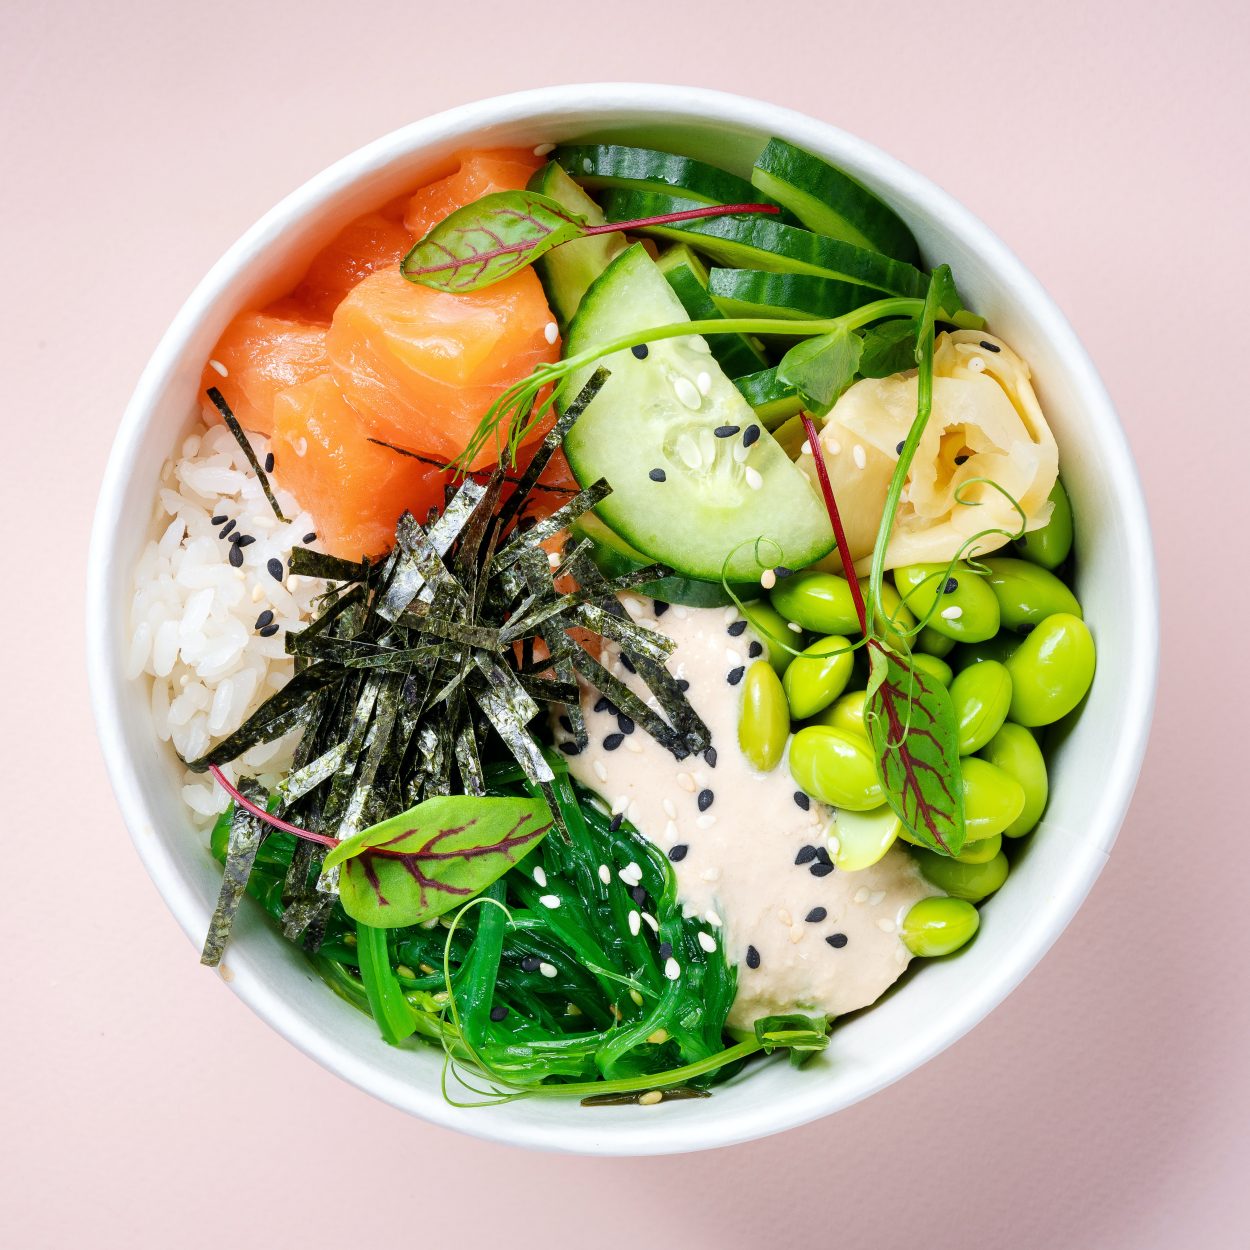 An image of a bowl of rice with vegetables on top.